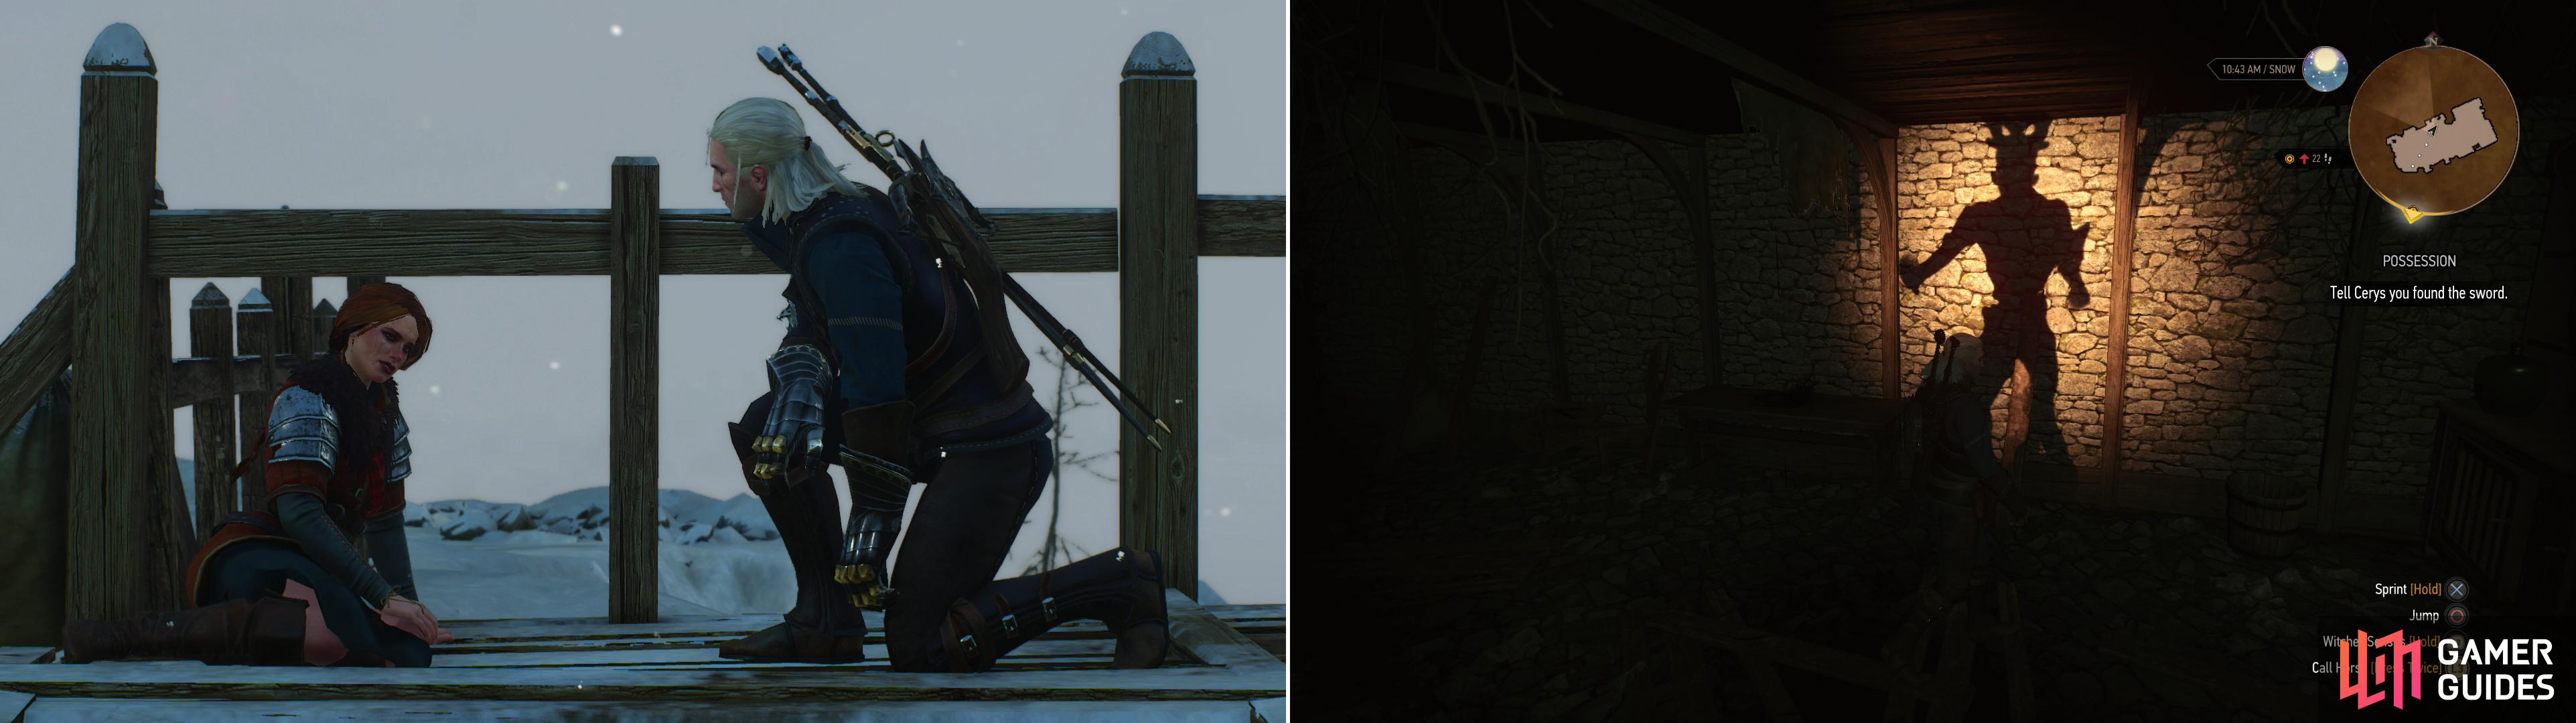 Geralt and Cerys chat after rescuing her from the Jarl's old house (left). An ominous specter appears as Geralt recovers the old family sword Brokvar from the cellar (right).